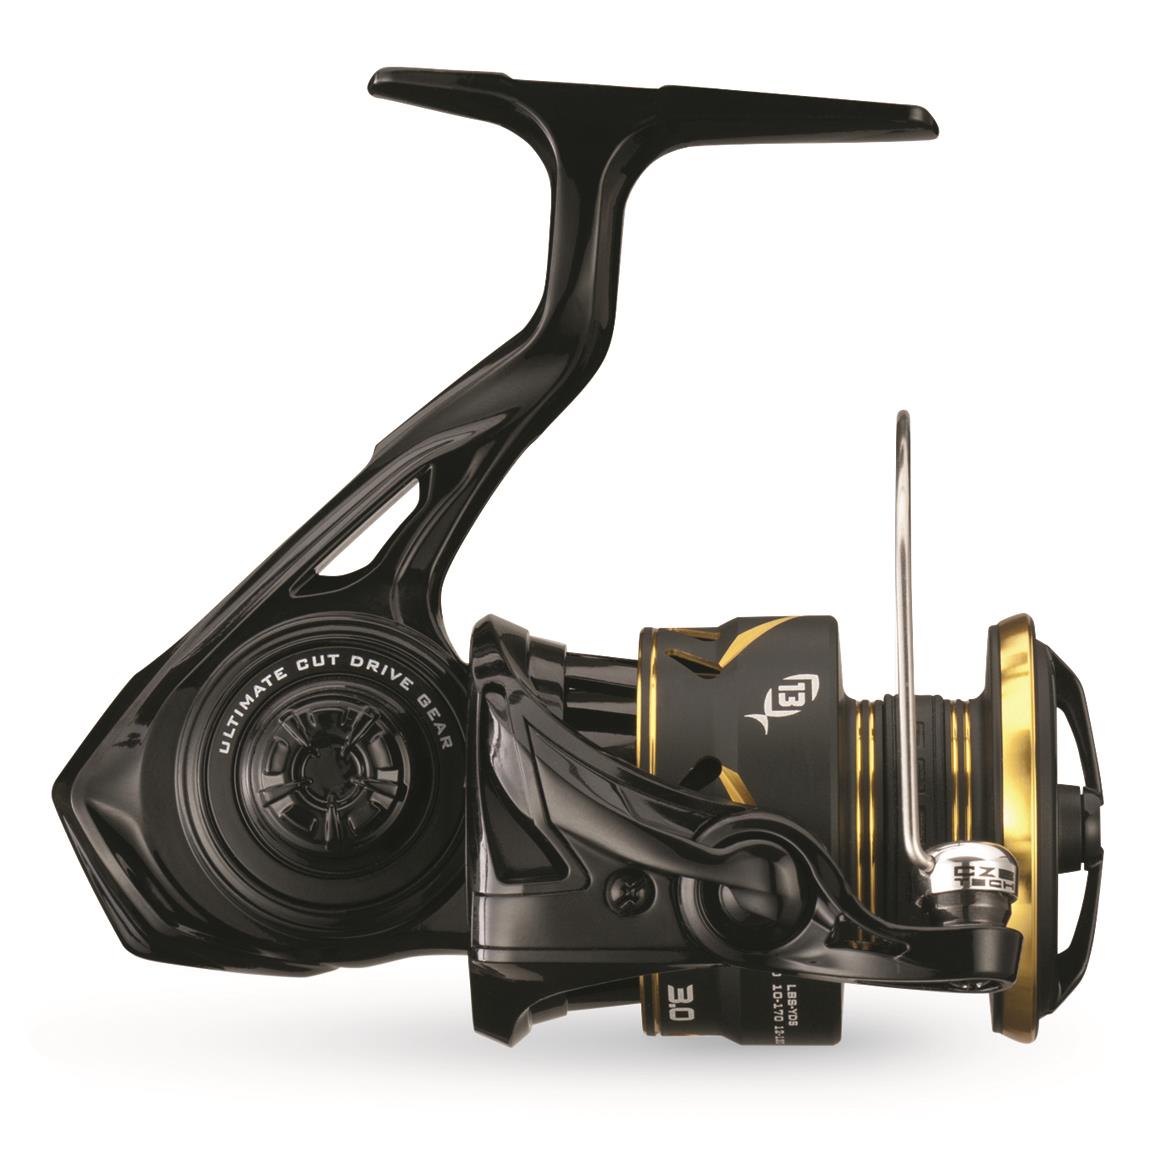 Mr. Crappie Wally Marshall Pro Target Spinning Reel, 5.2:1 Gear Ratio -  737363, Spinning Reels at Sportsman's Guide